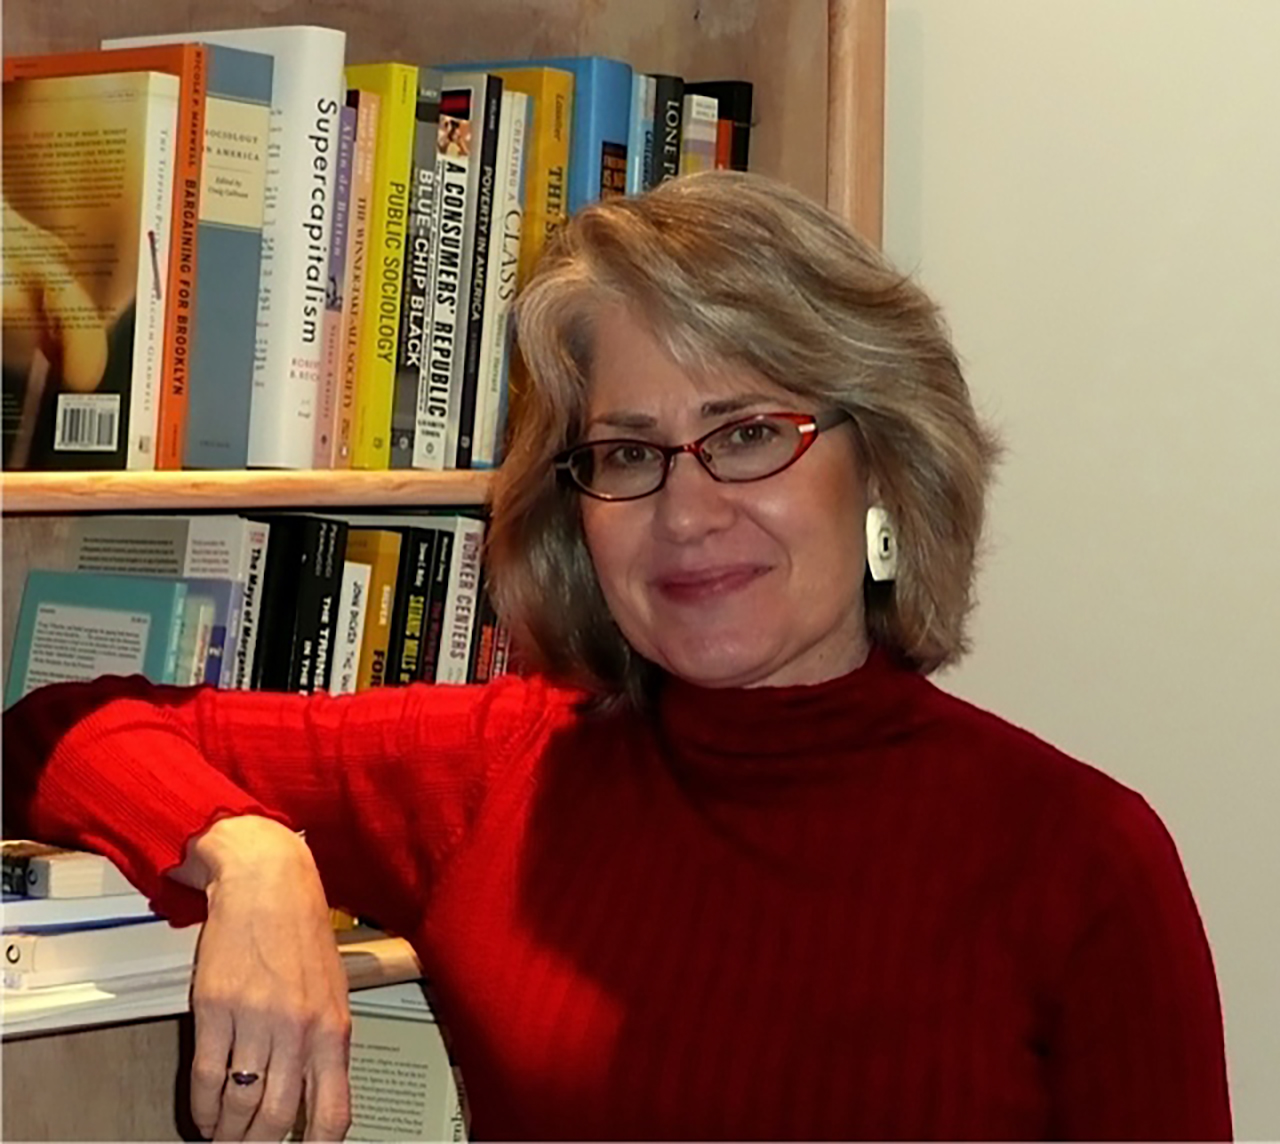 Kim Voss, posing in a red turtleneck leaning with her arm on a bookshelf